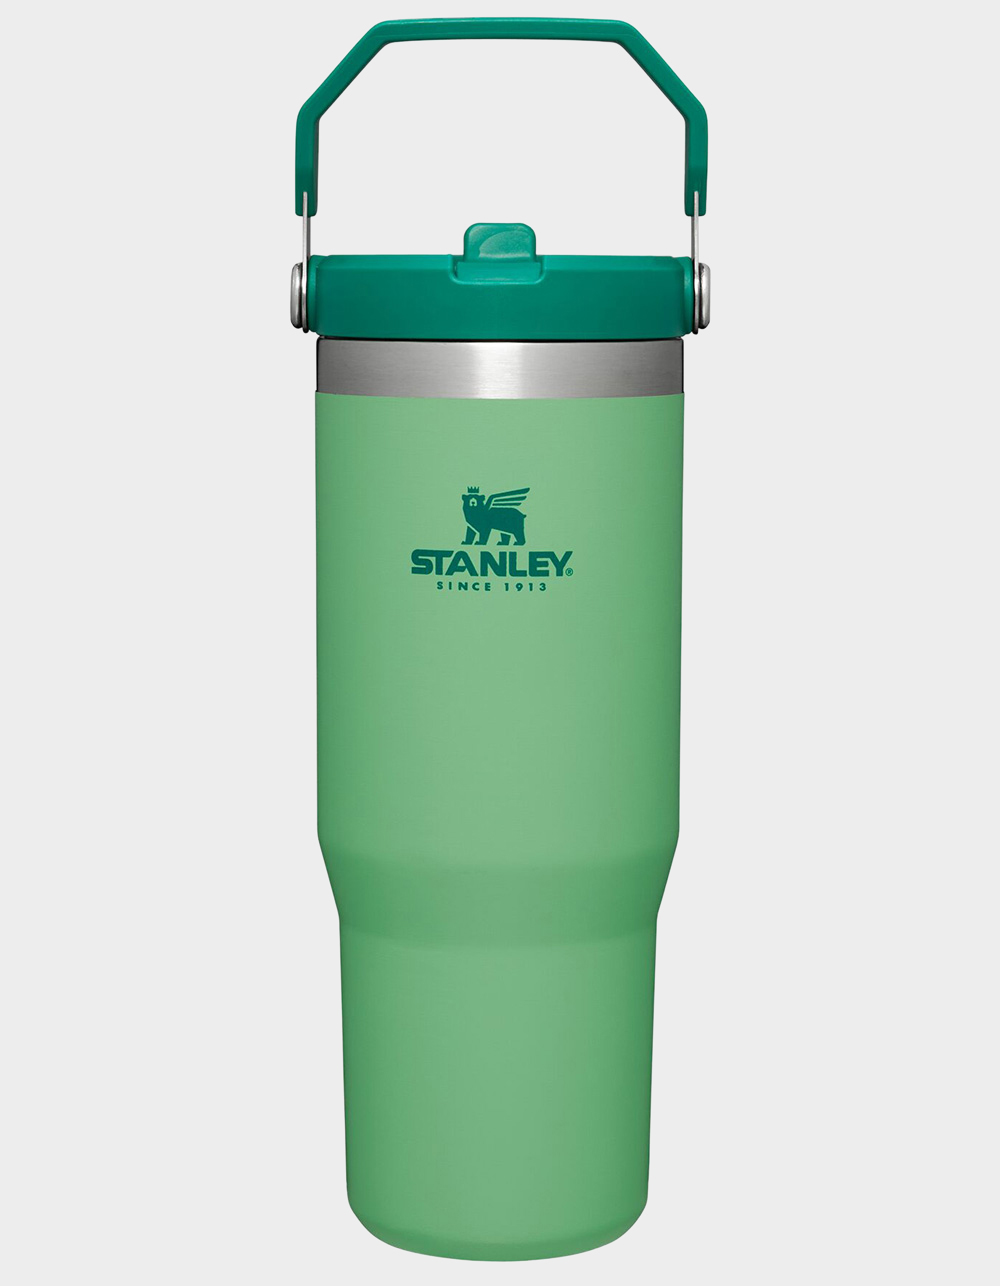 NEW ITEMS ARE HERE!! Mini Stanley Tumbler Keychains to match your cust